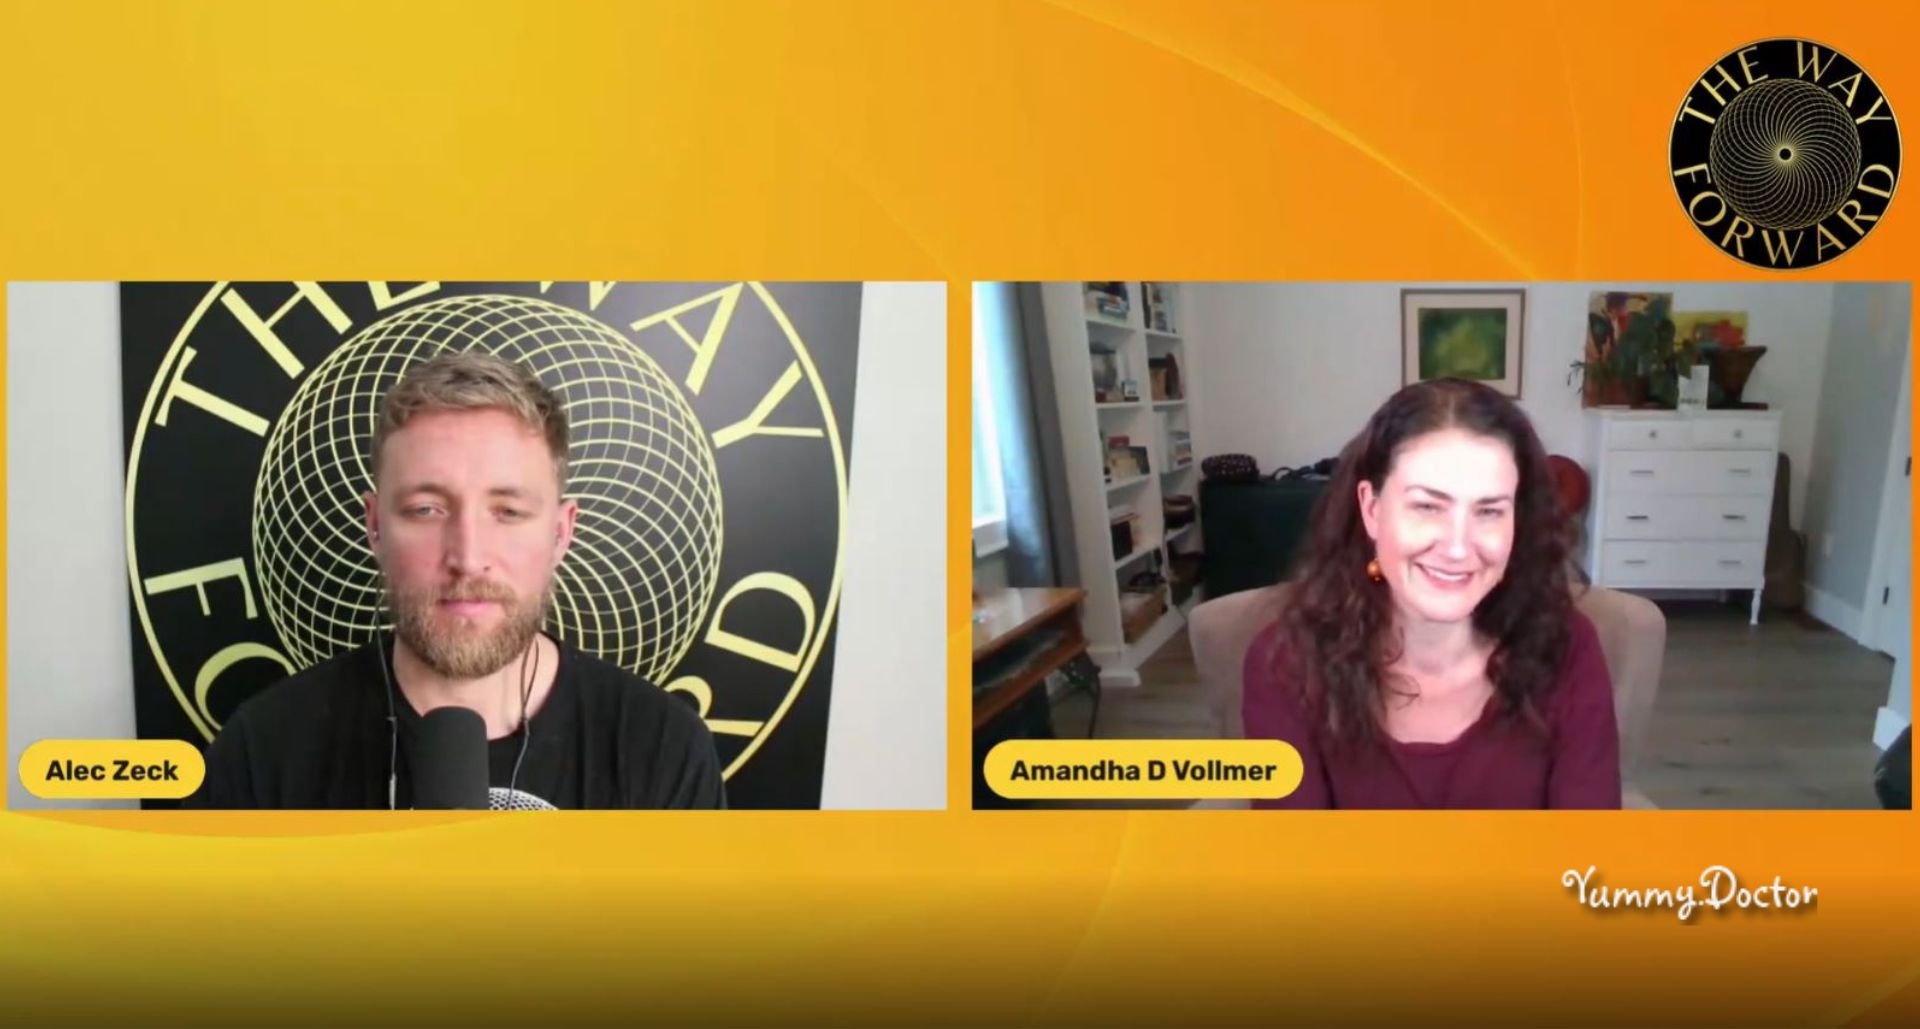 Debunking RSV with Amandha Vollmer (ADV) and Alec Zeck of The Way Forward